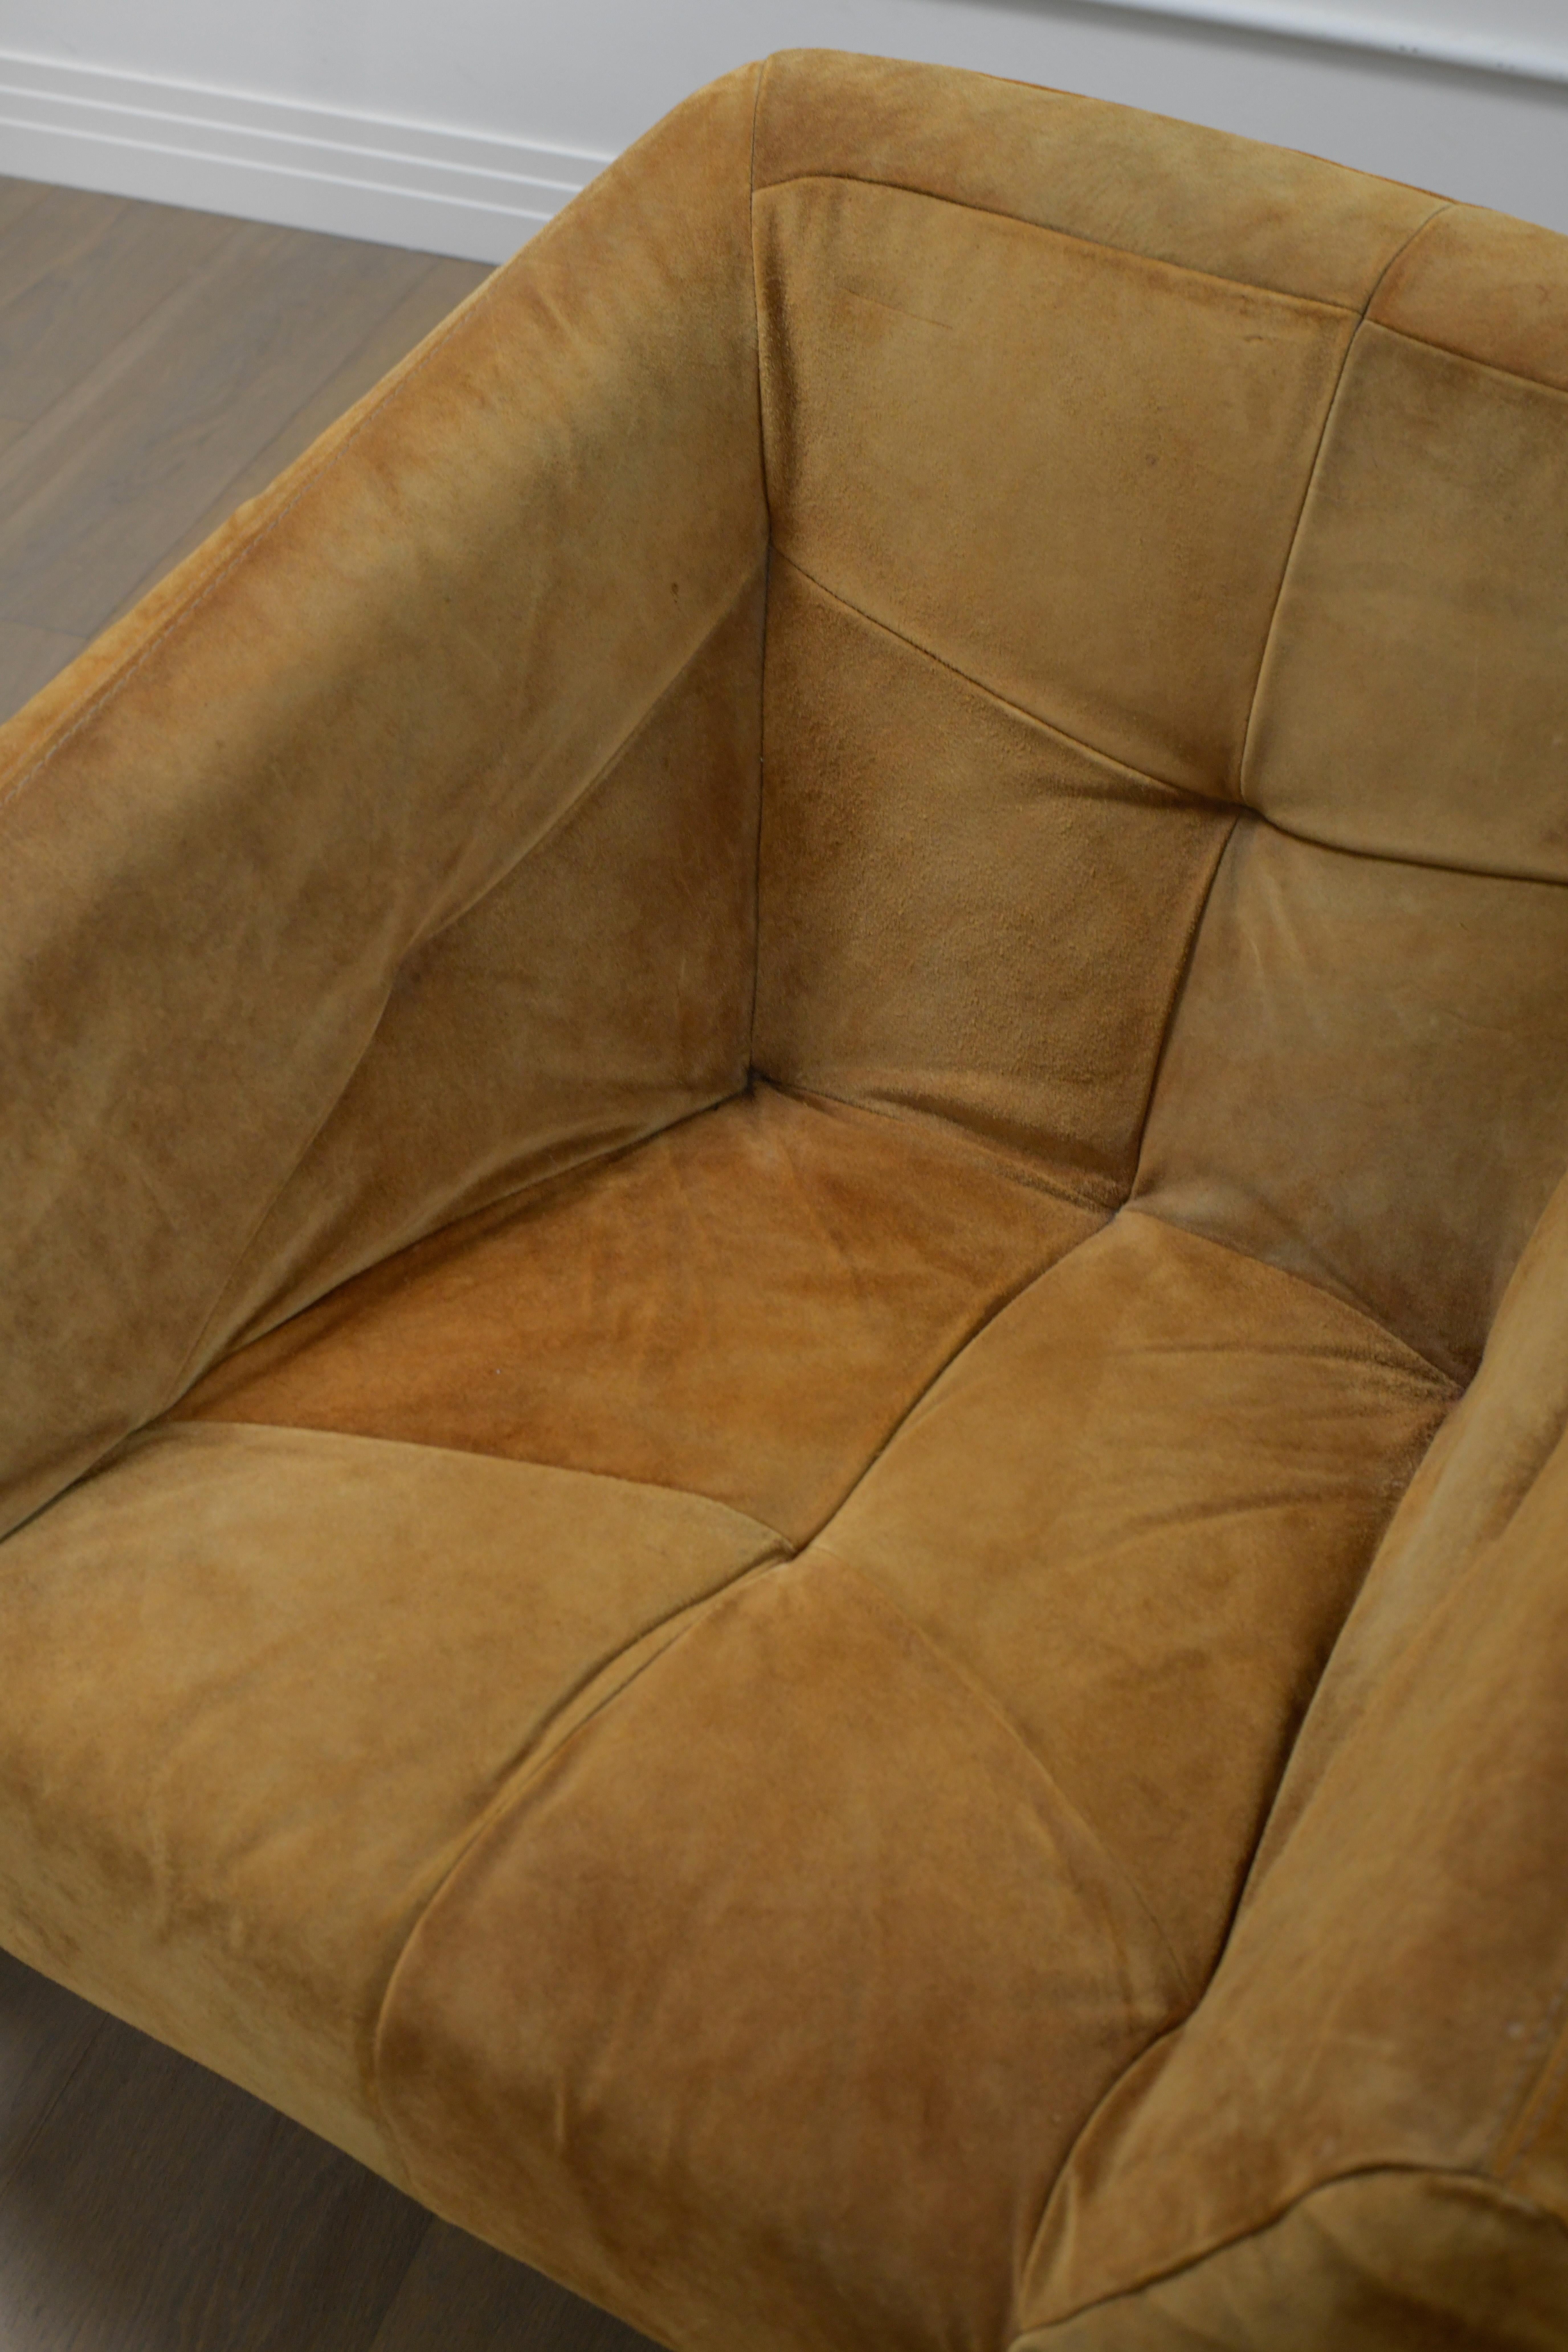 Percival Lafer Lounge Chairs  In Good Condition For Sale In Los Angeles, CA